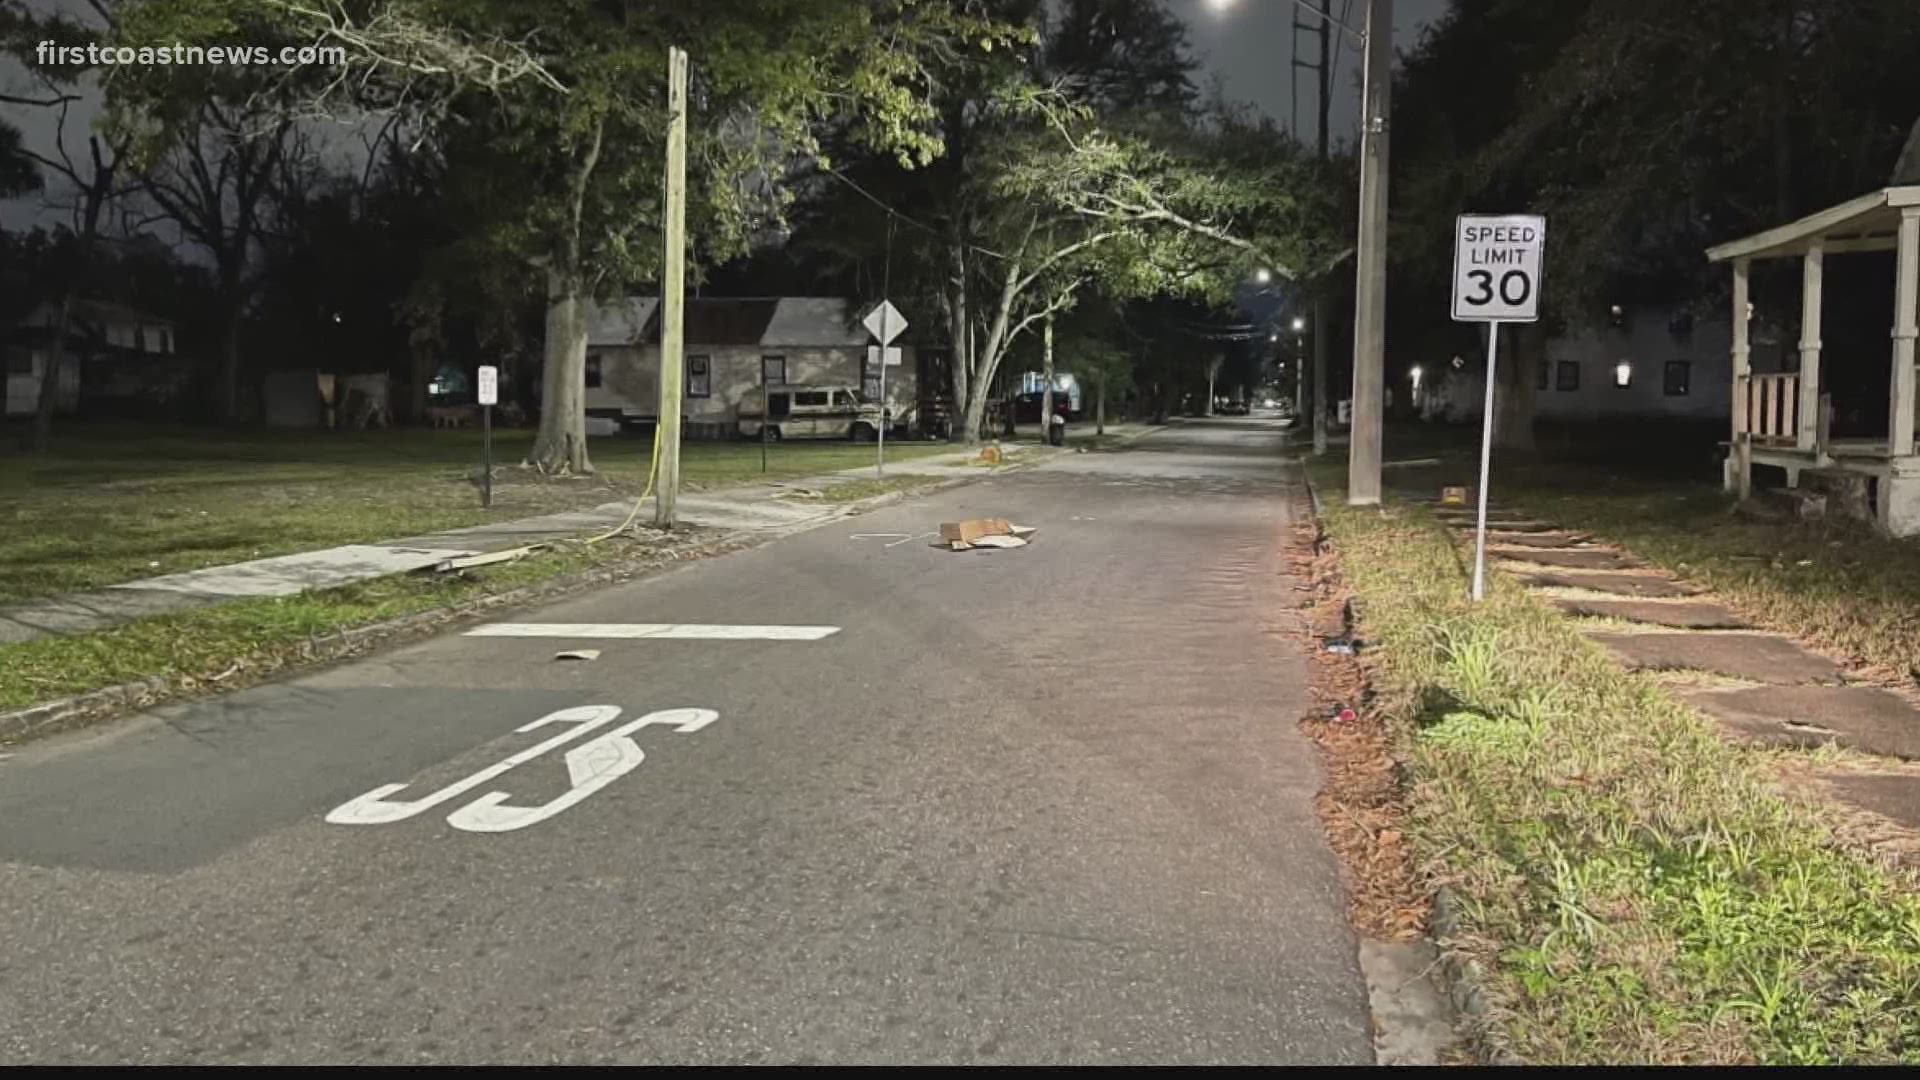 According to the JSO, the suspect allegedly retrieved a gun after and argument with his father and shot him. The father suffered non-life-threatening injuries.